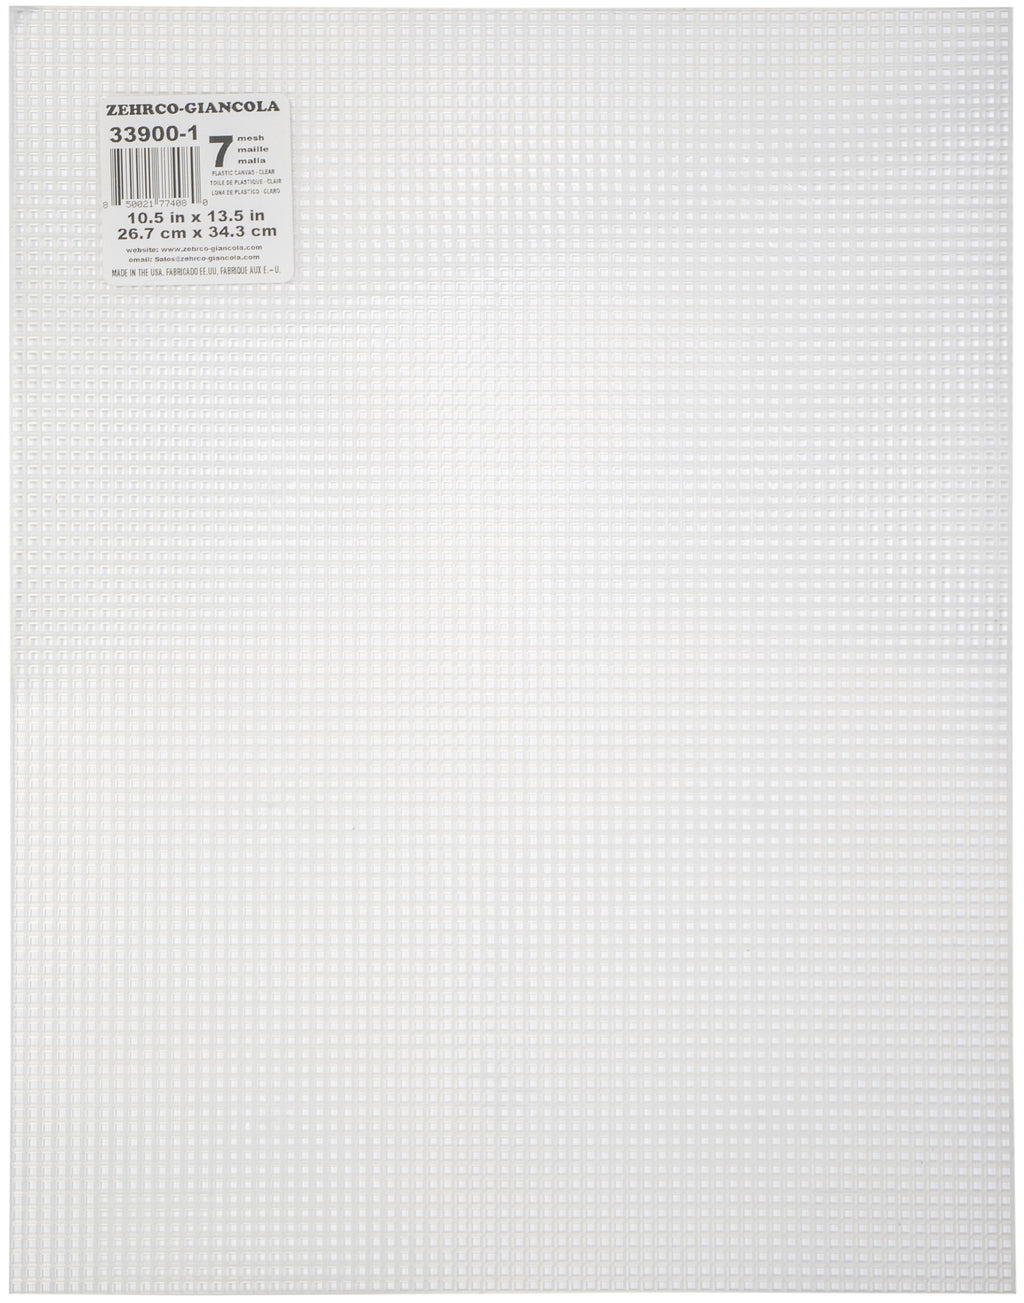 14-Count Clear Plastic Canvas Sheets